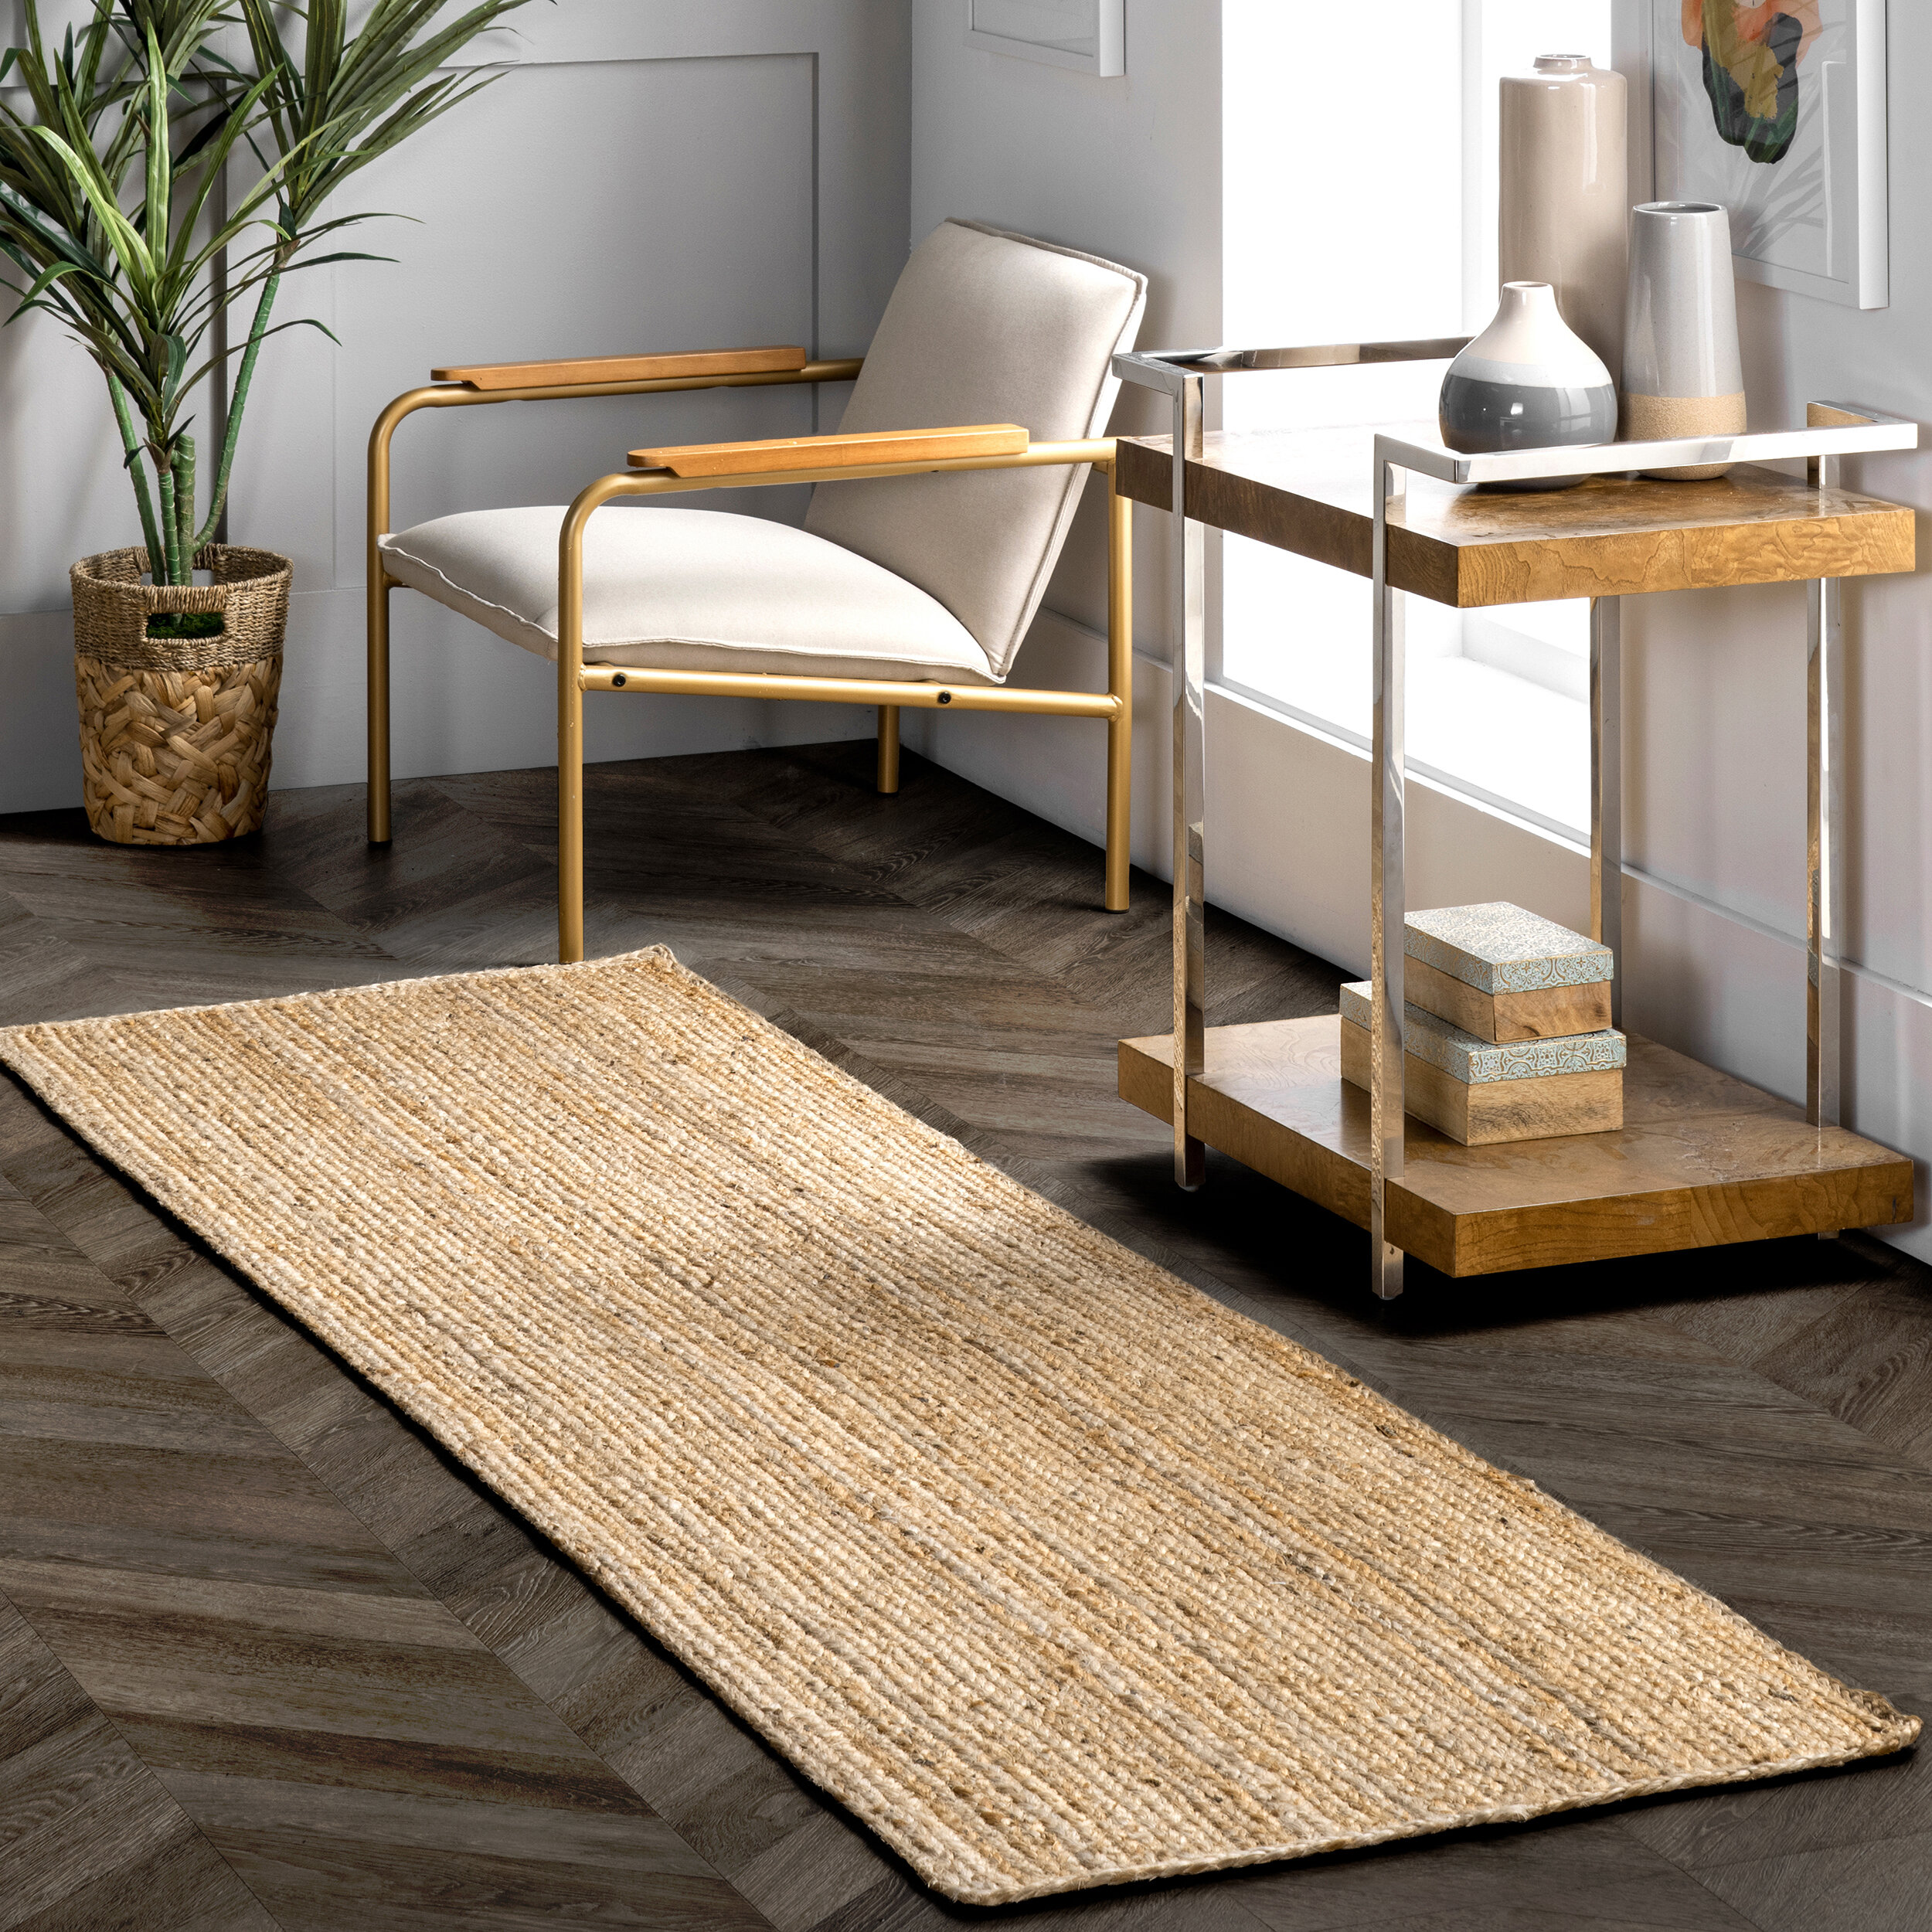 Cotton Rug Throw Rug 2 by 3 Feet Style- 19 The Art Box Boho Area Rugs Rugs for Bedroom to Protects Your Floors from Damage and Add Both Warmth and Color to a Space Washable Rug 